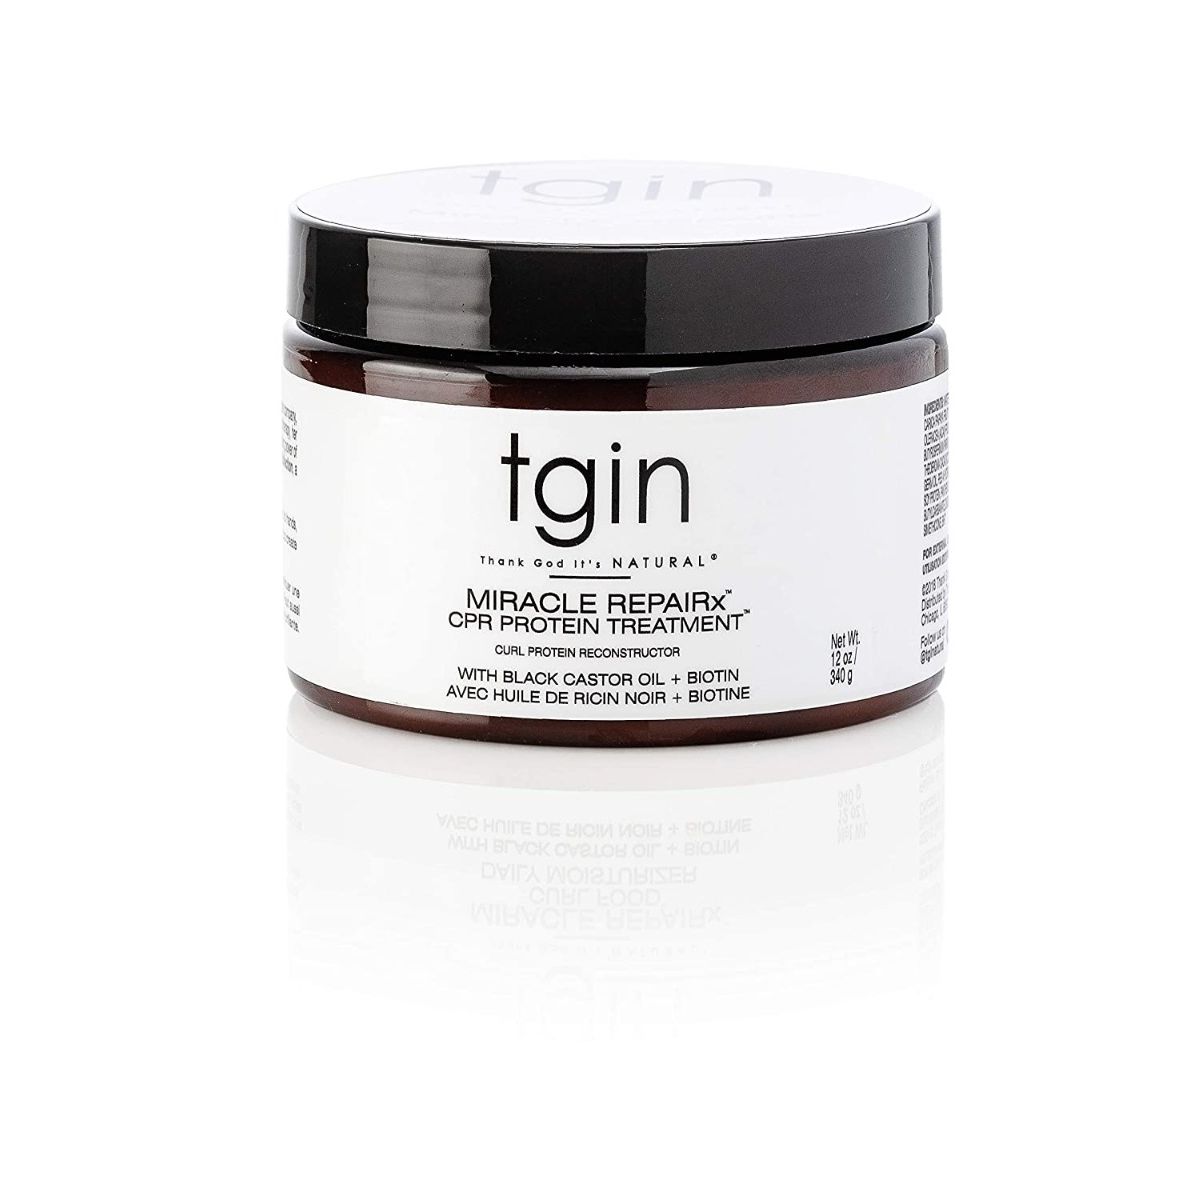 TGIN - Miracle RepaiRx CPR Protein Treatment